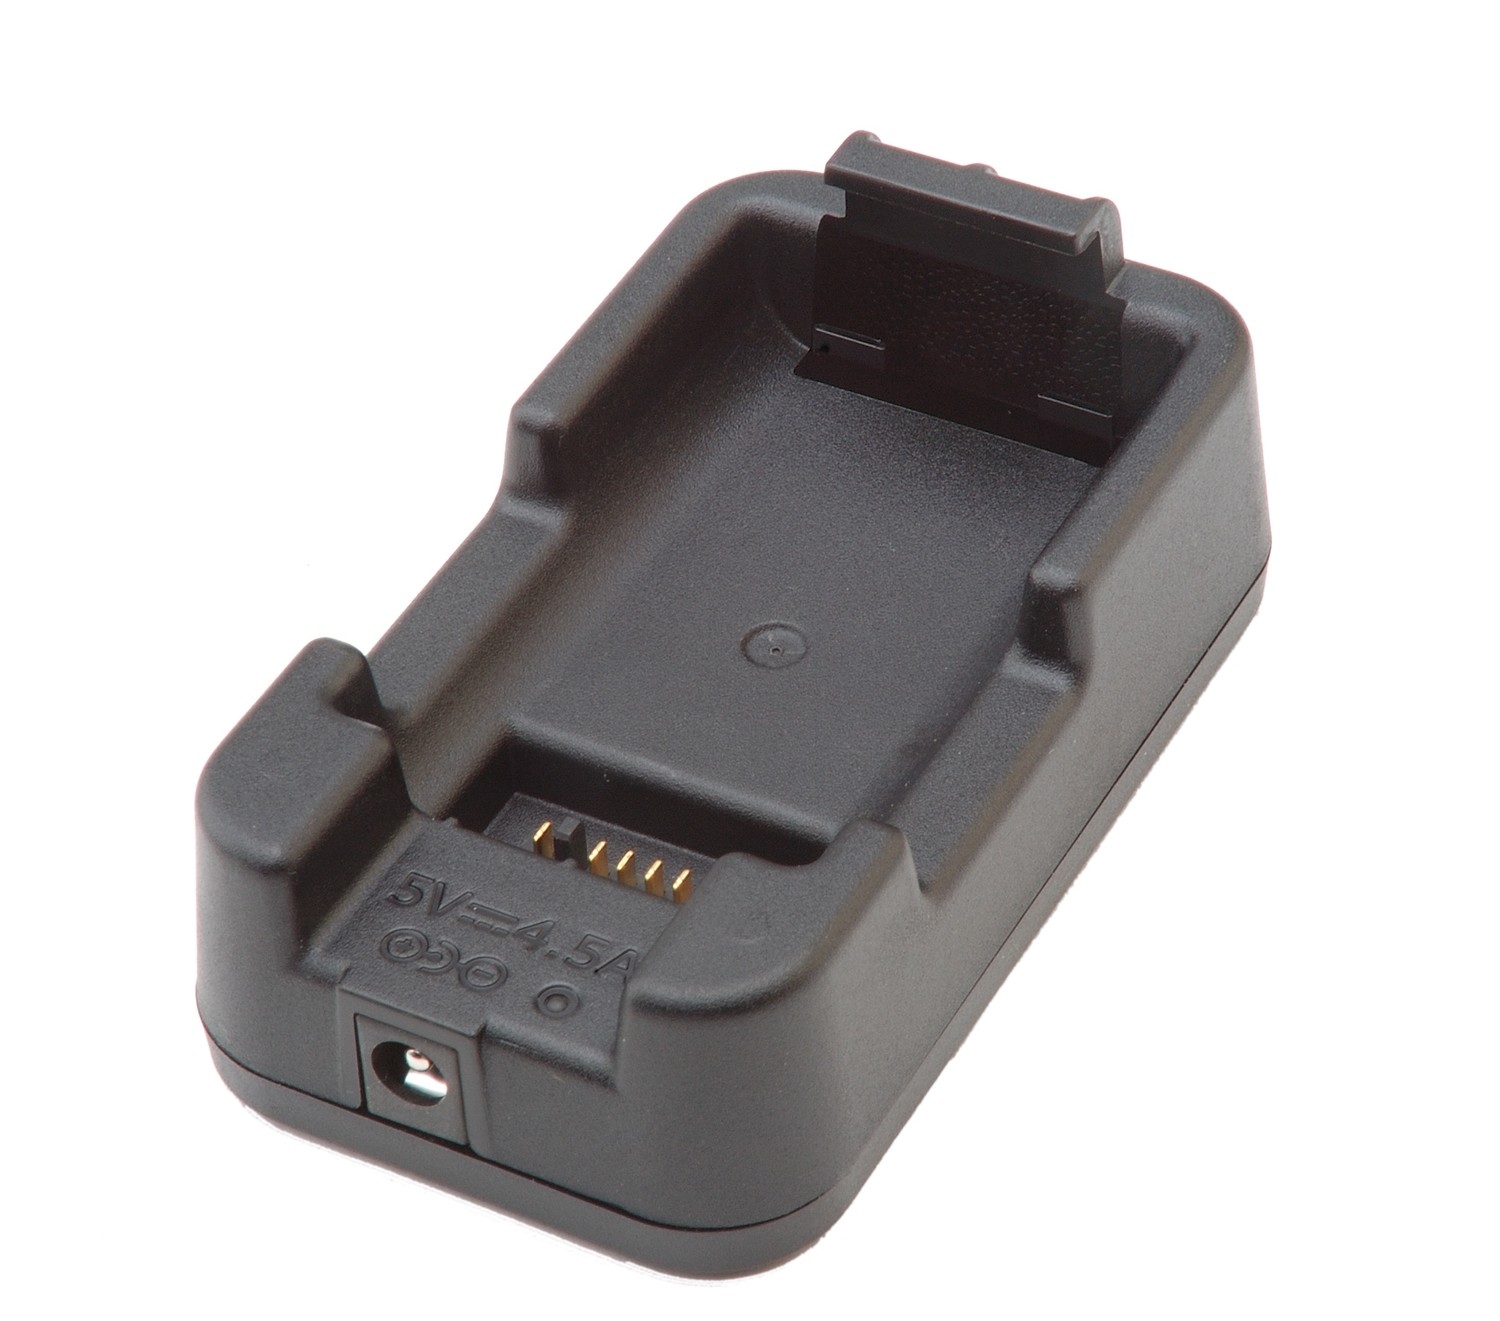 Trimble Nomad Spare Battery Charger